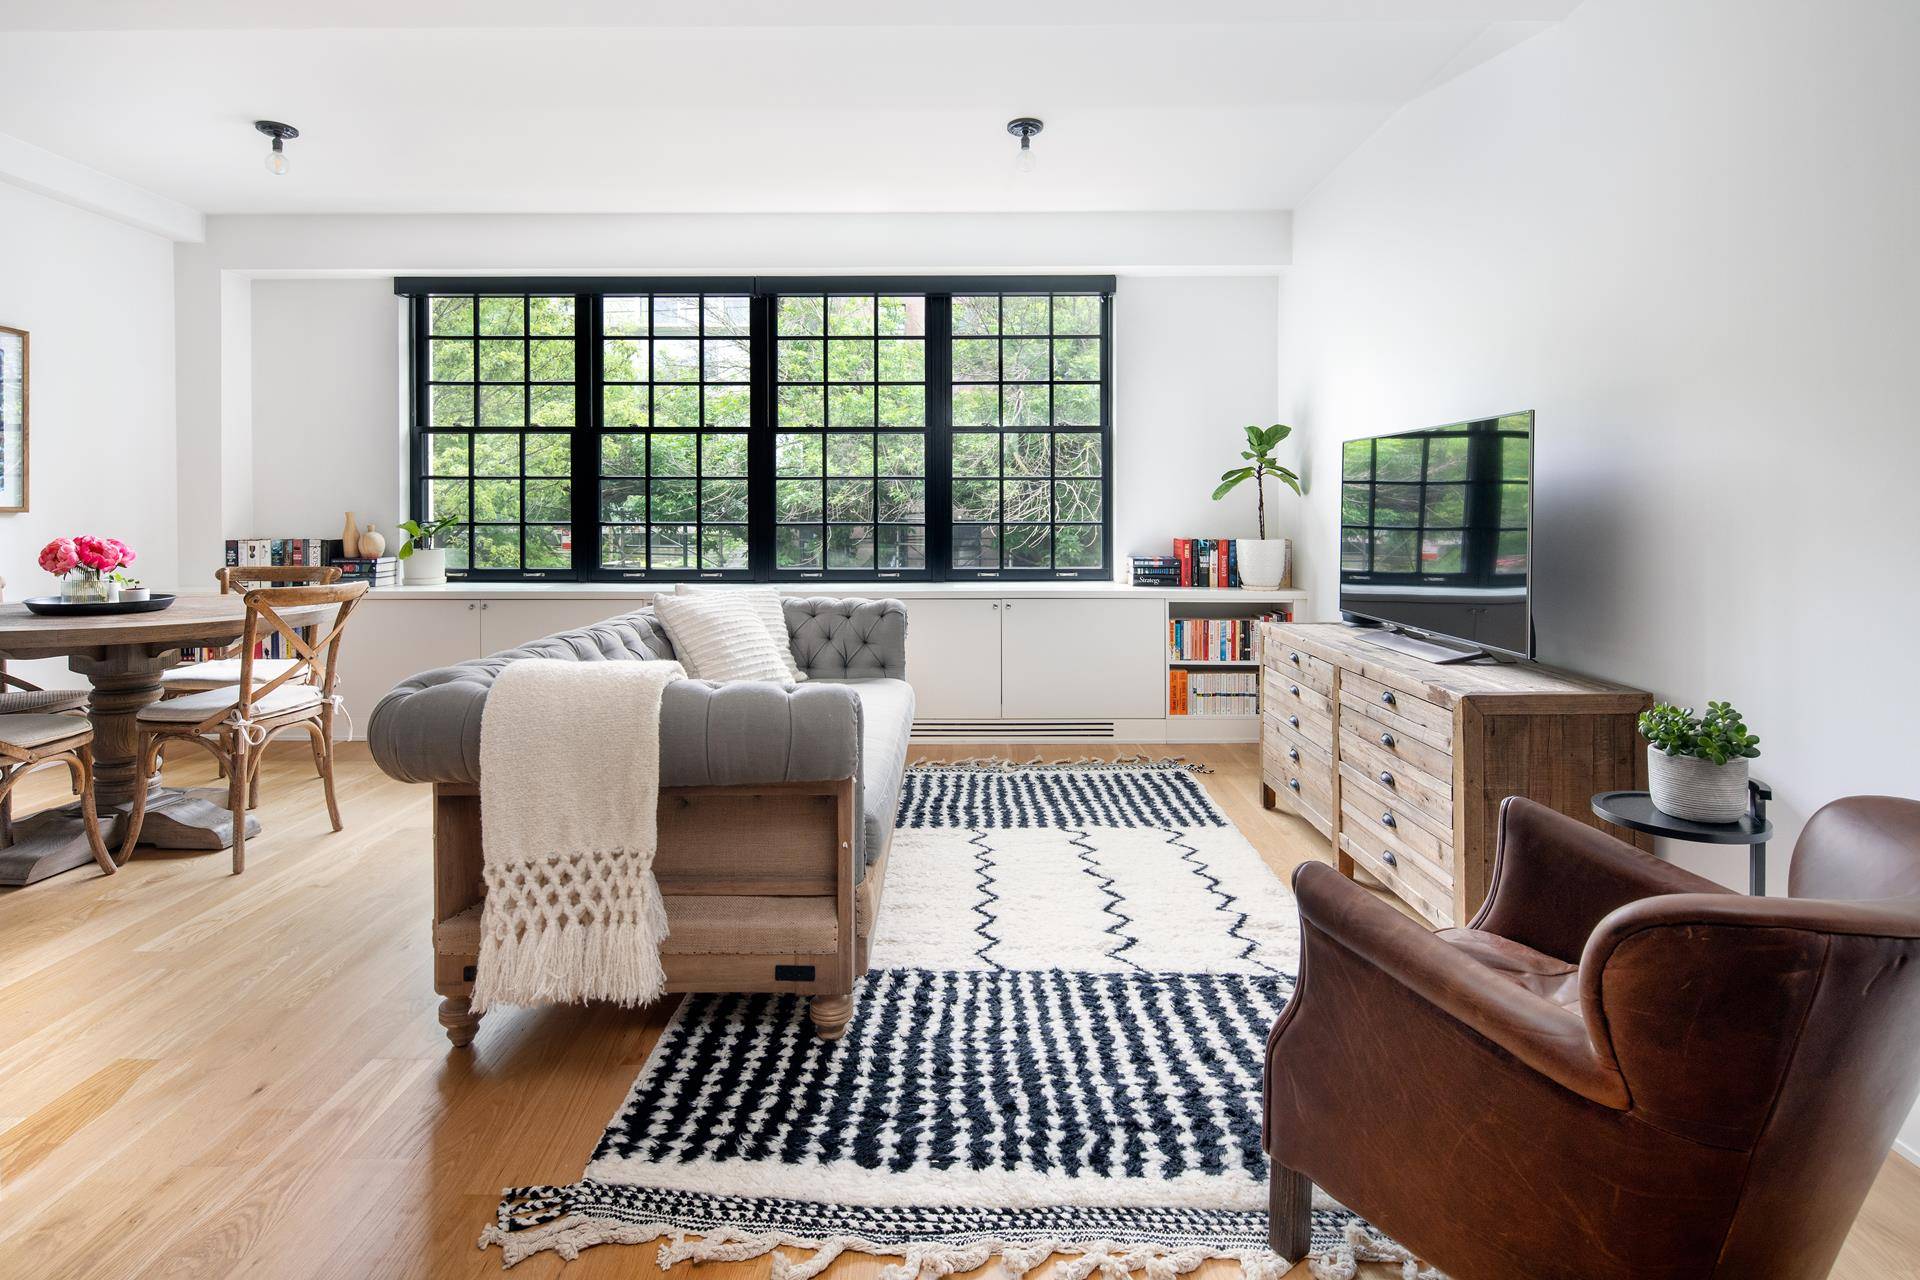 Stunning sun splashed interiors and the perfect Park Slope location await in this contemporary two bedroom, two bathroom condominium by the respected Brooklyn Home Company.